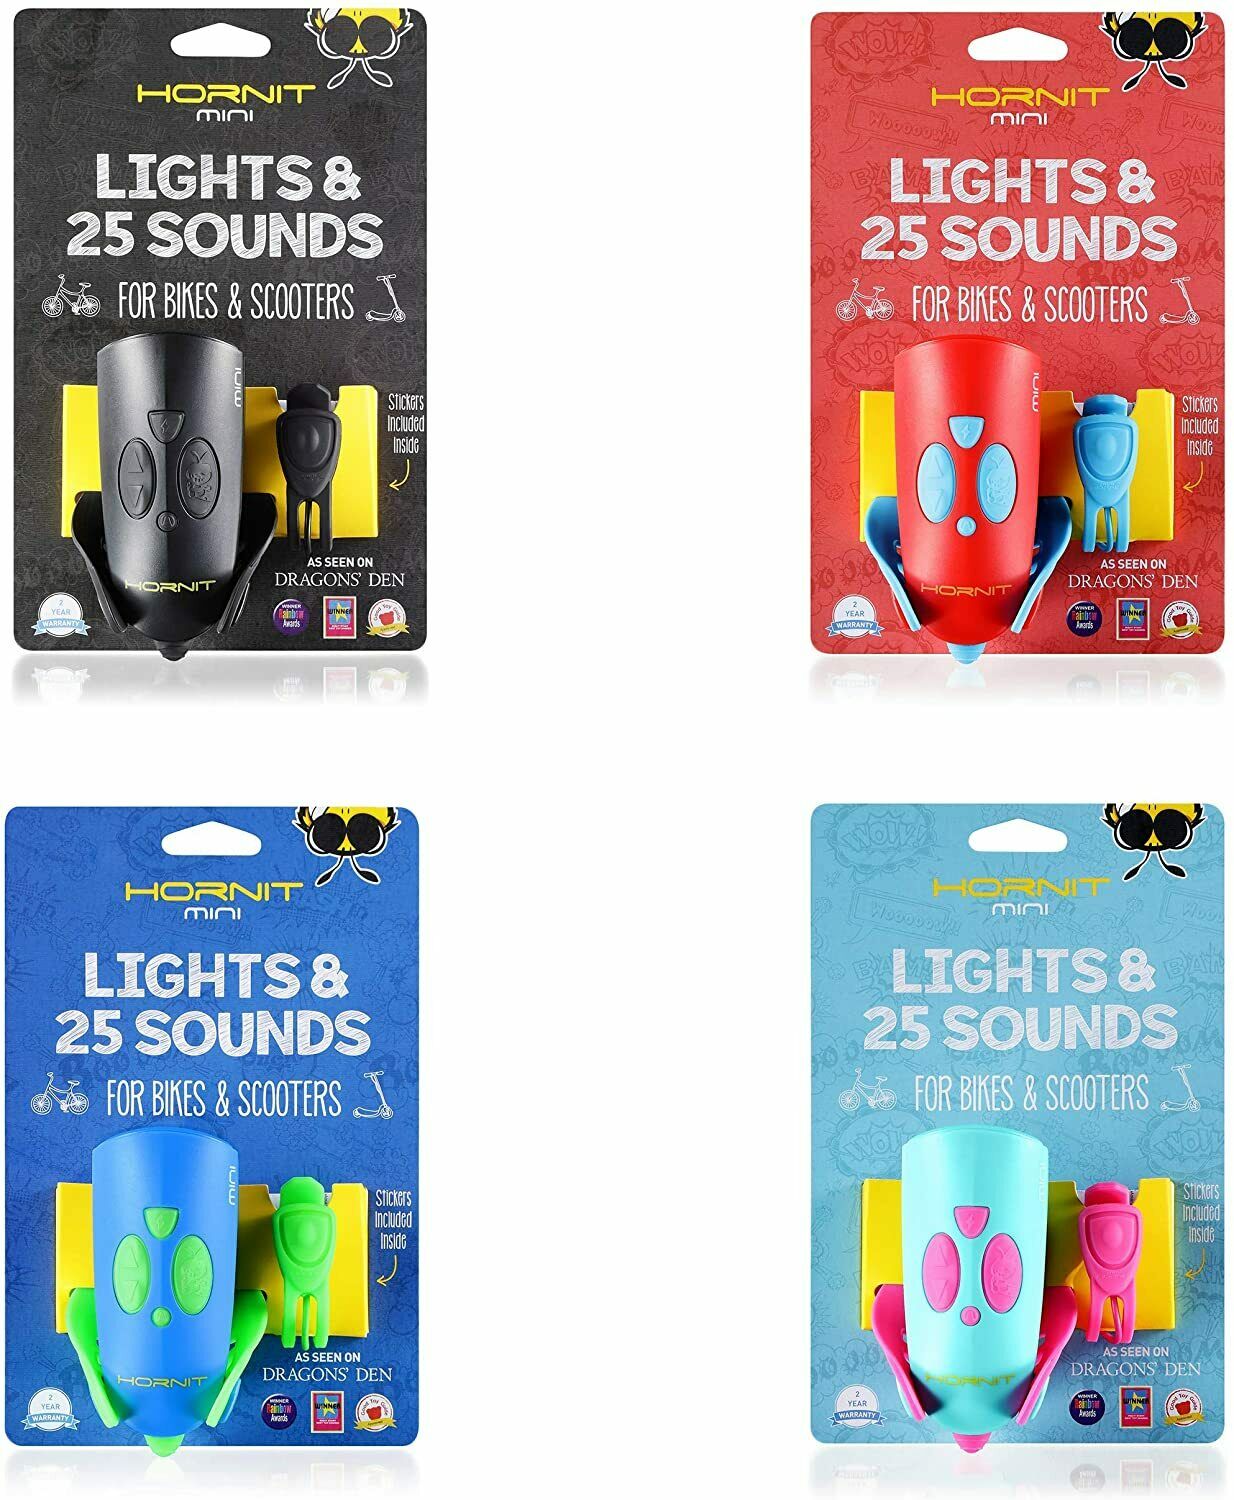 Microphone Filters - Cycliq - Bike Camera and Safety Lights